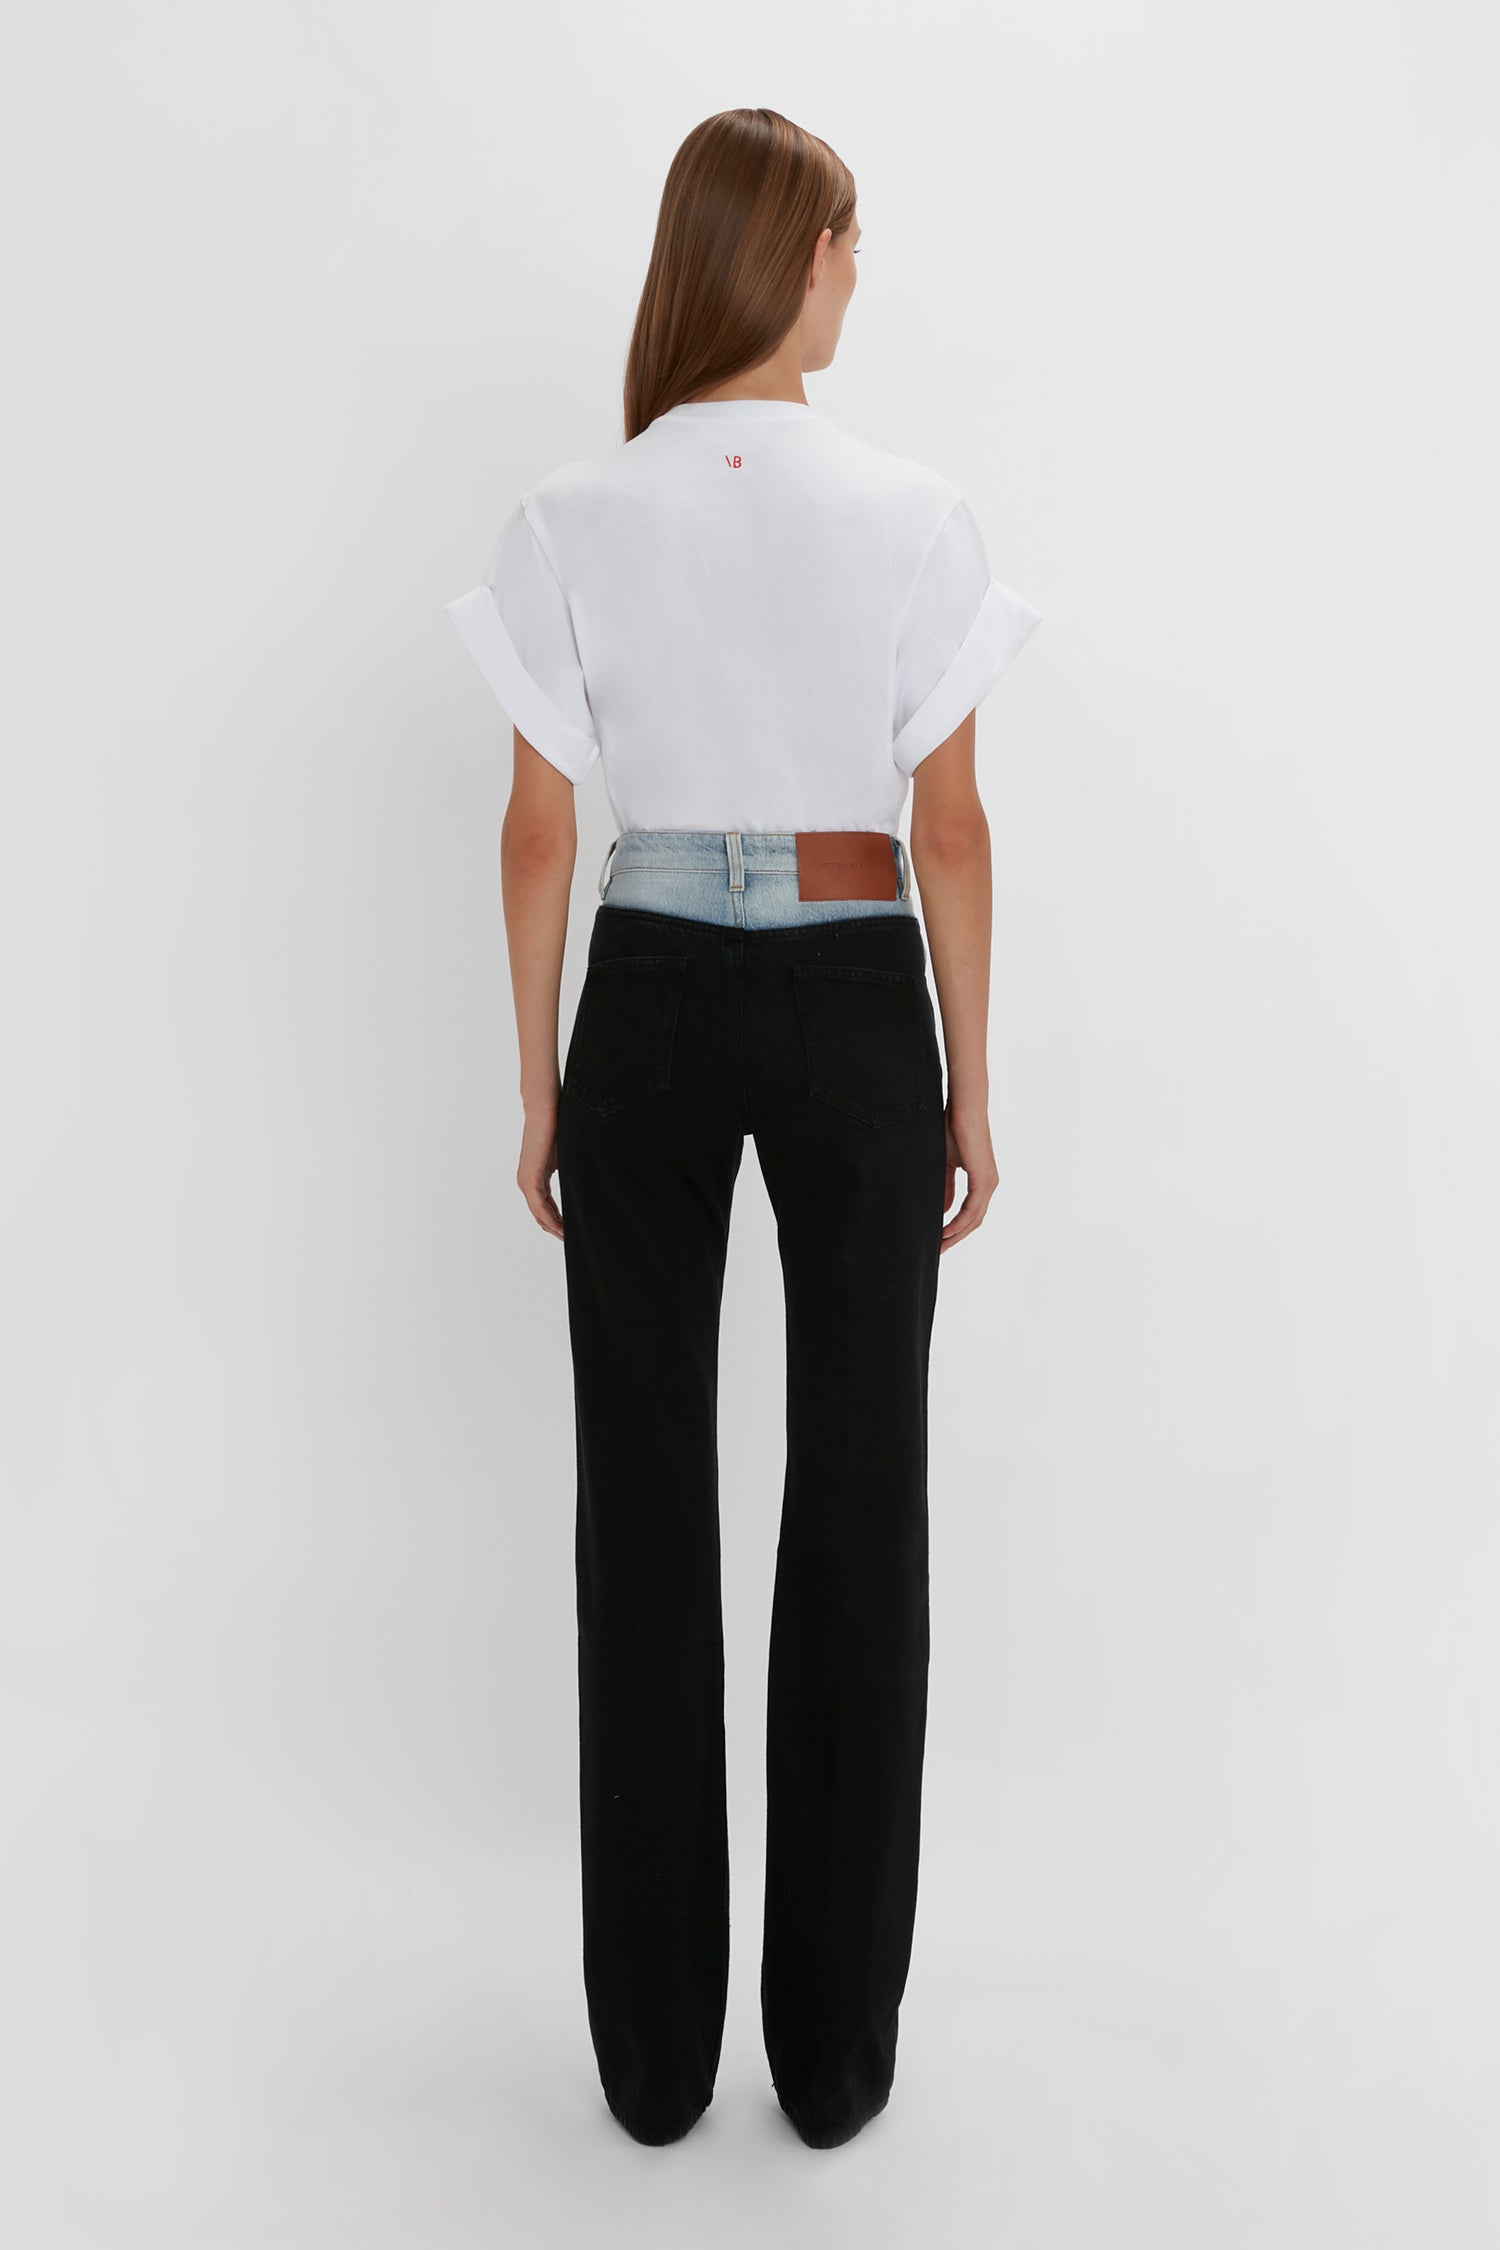 Woman standing with her back to the camera, wearing a white t-shirt and black Victoria Beckham Julia Jean In Contrast Wash on a plain background.